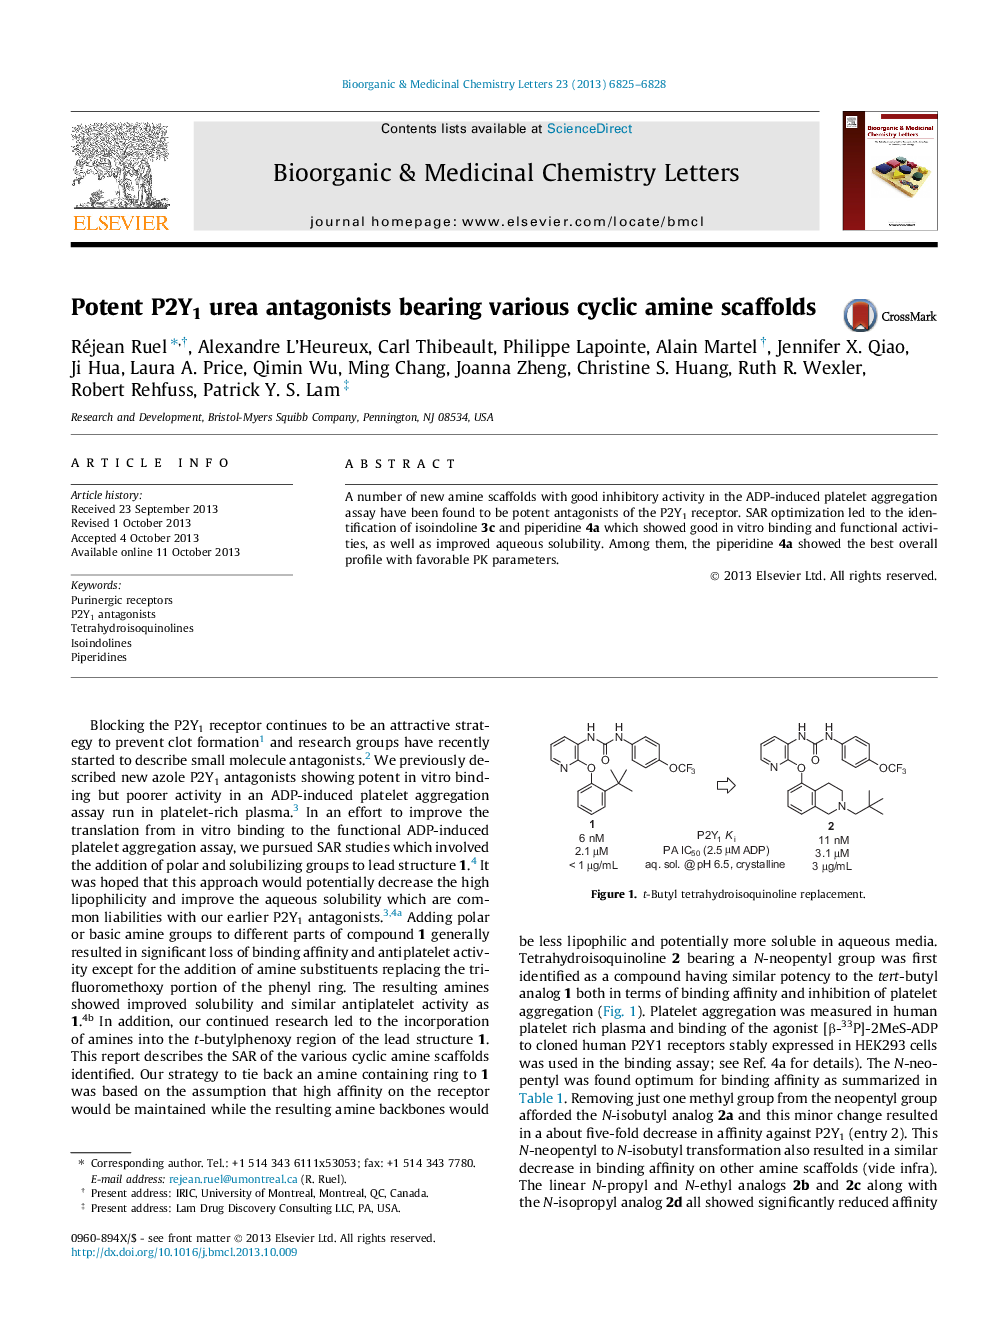 Potent P2Y1 urea antagonists bearing various cyclic amine scaffolds